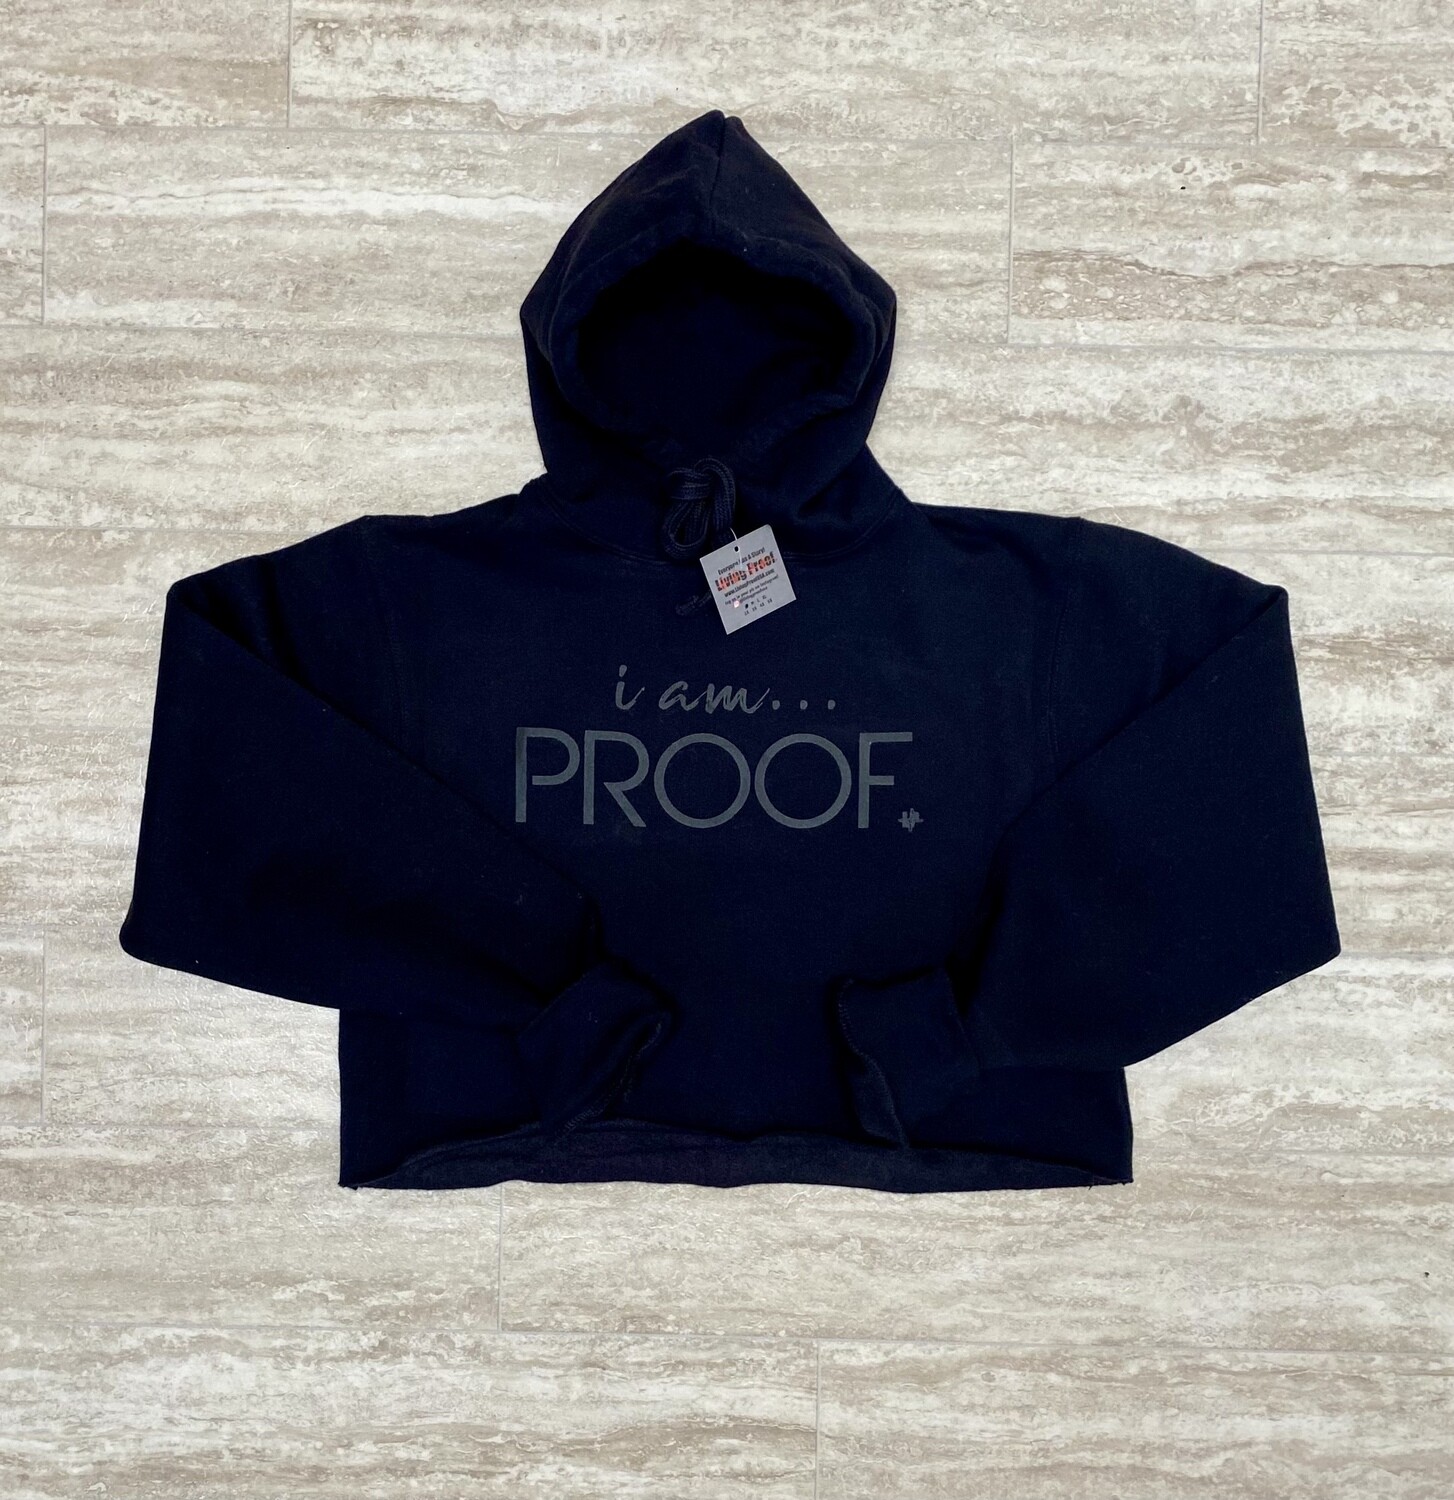 “i am PROOF” Crop Top Hoodies (click on photo to view available colors)